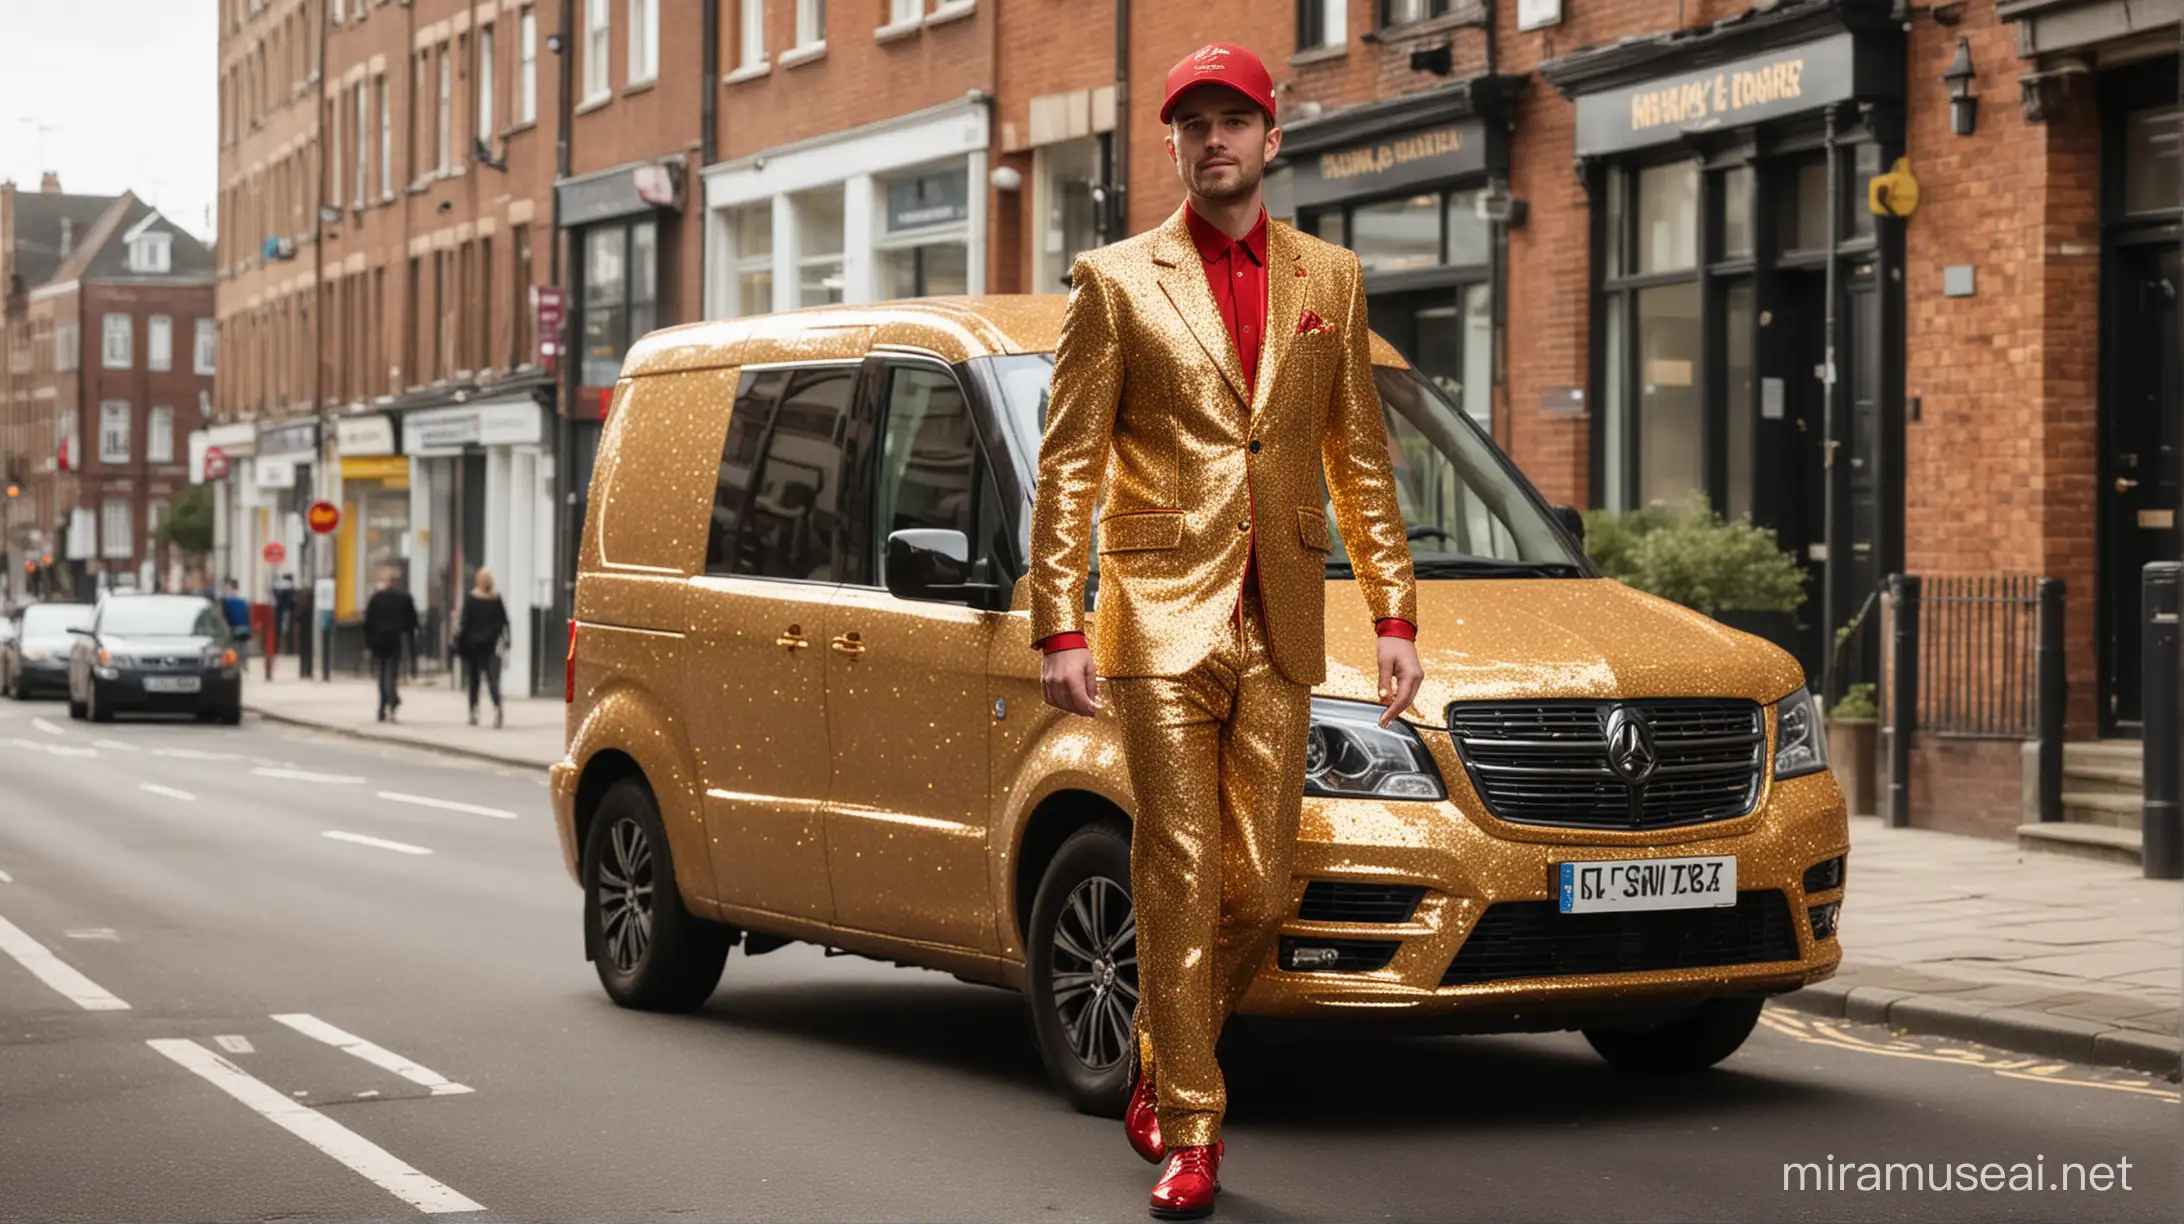 Show me a realistic image of a food delivery driver wearing an over the top gold and red sequin suit driving across Manchester